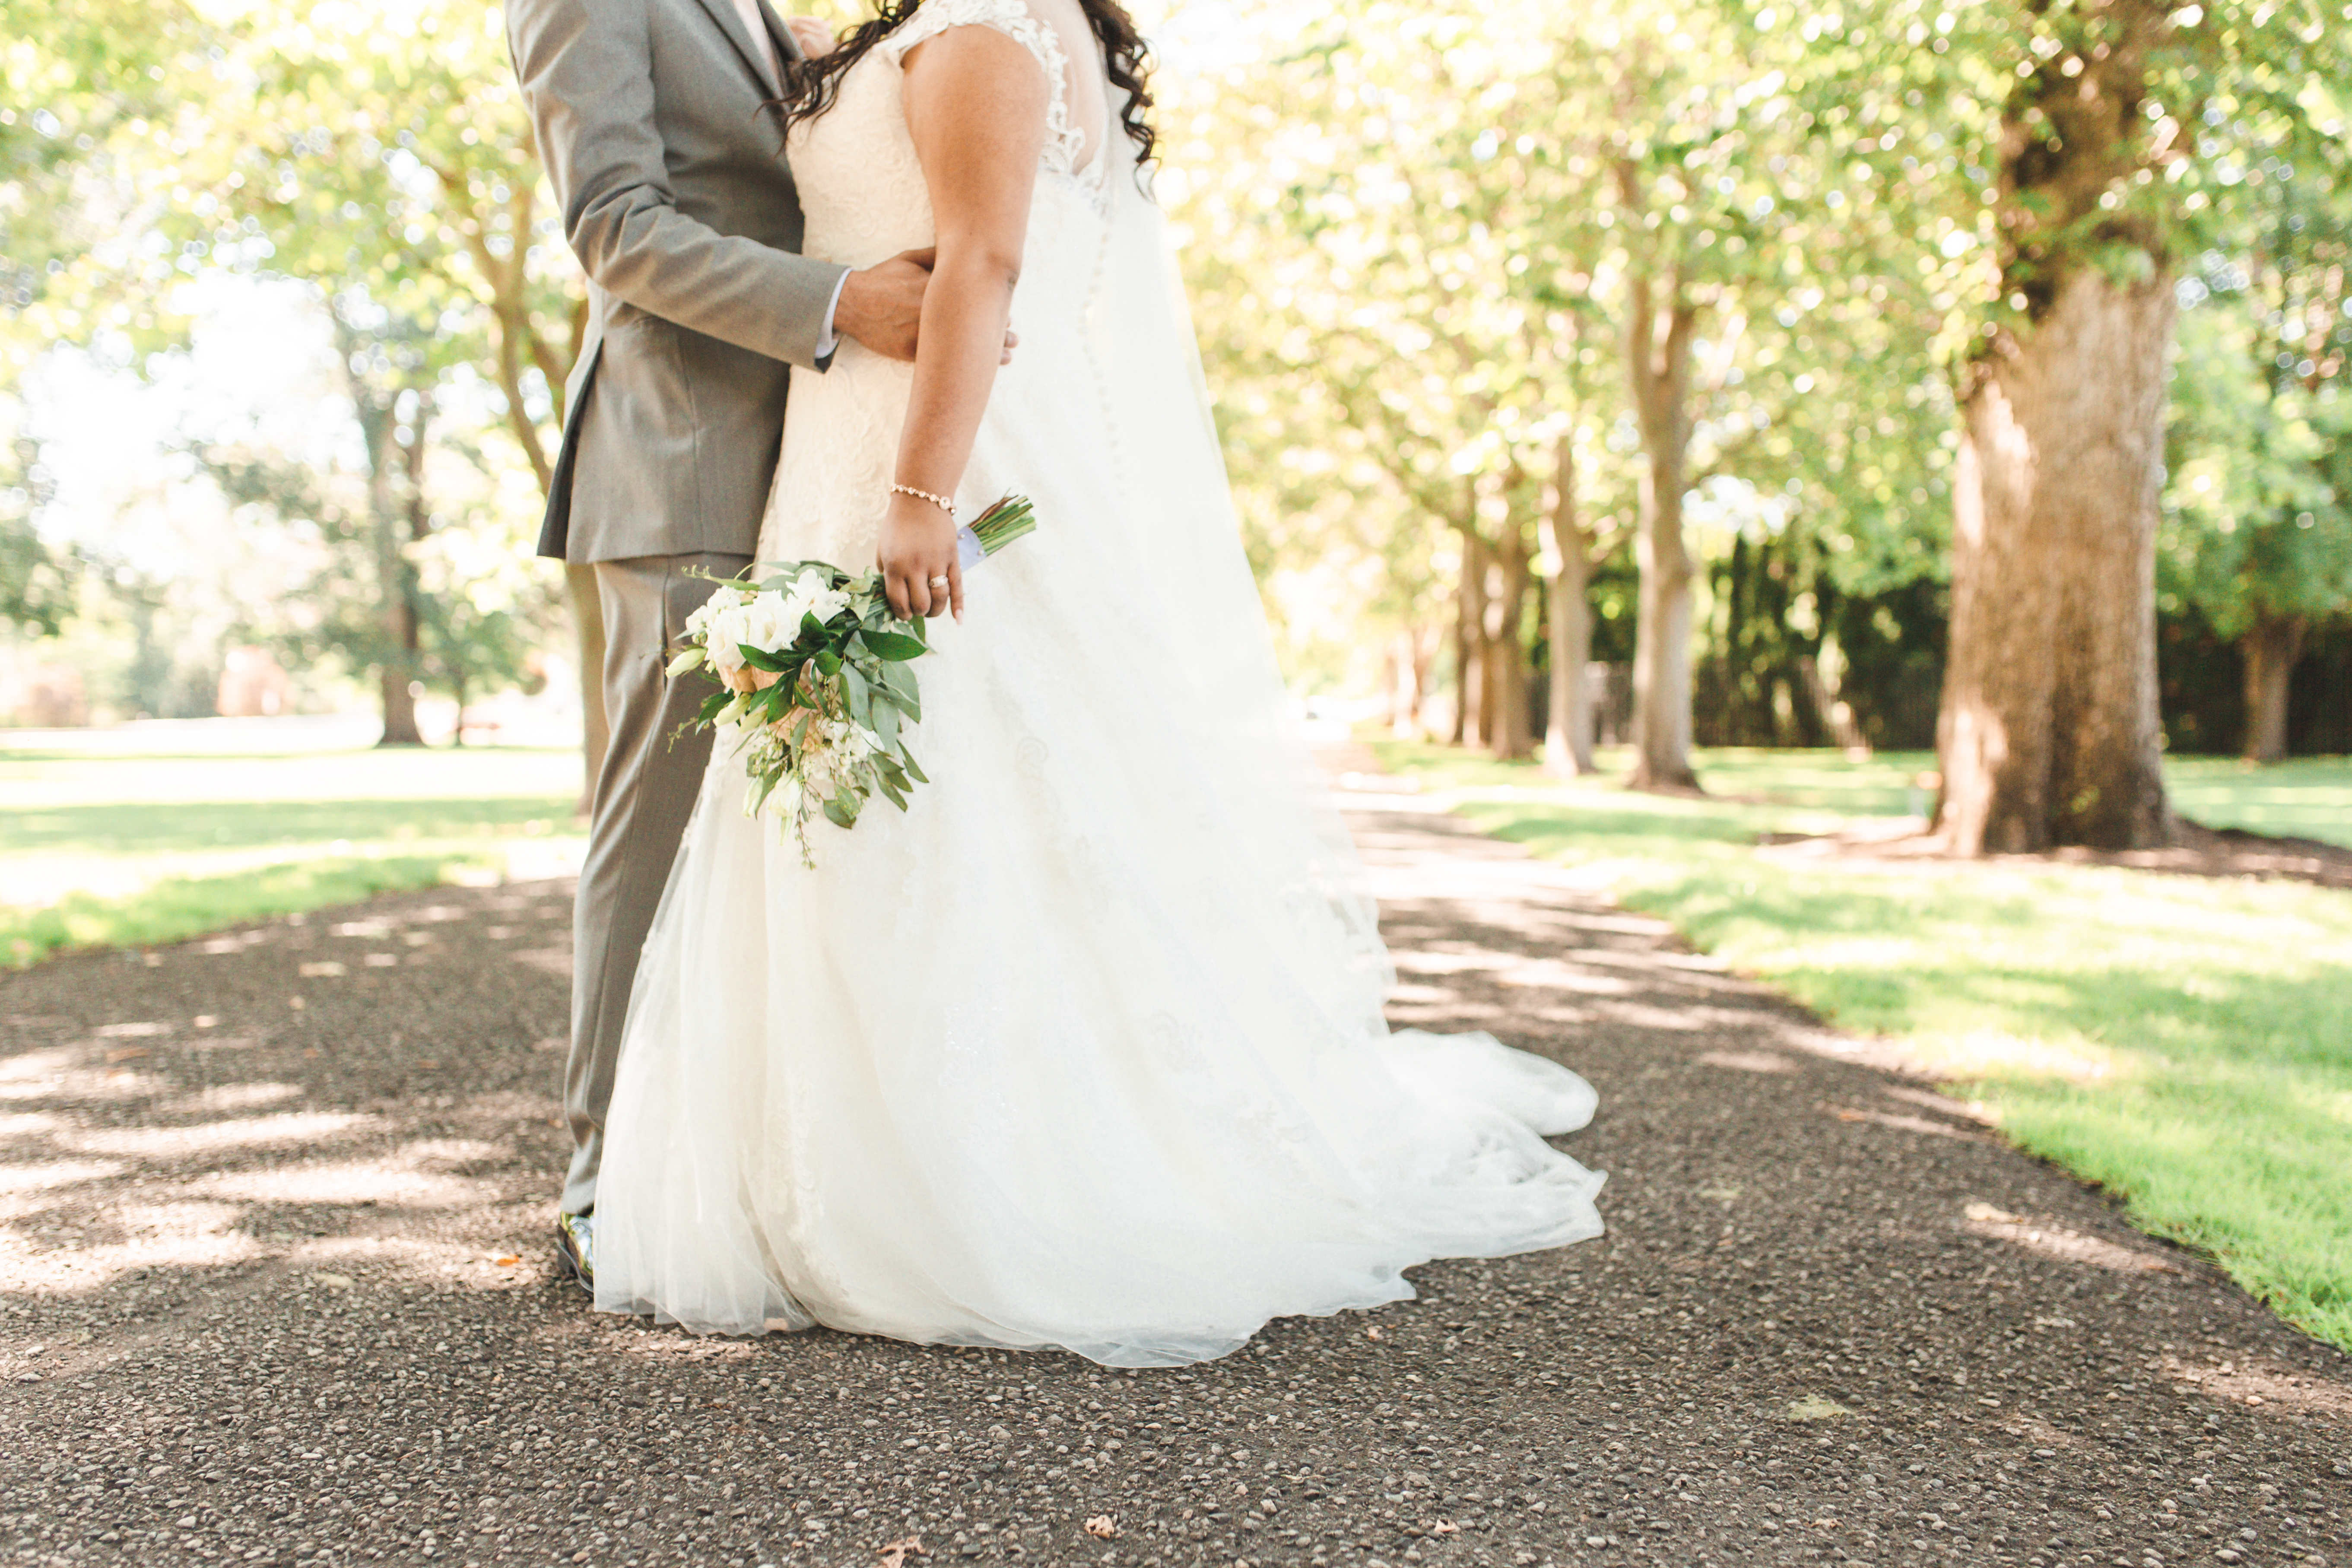 7 reasons why you should consider a first look on your wedding day